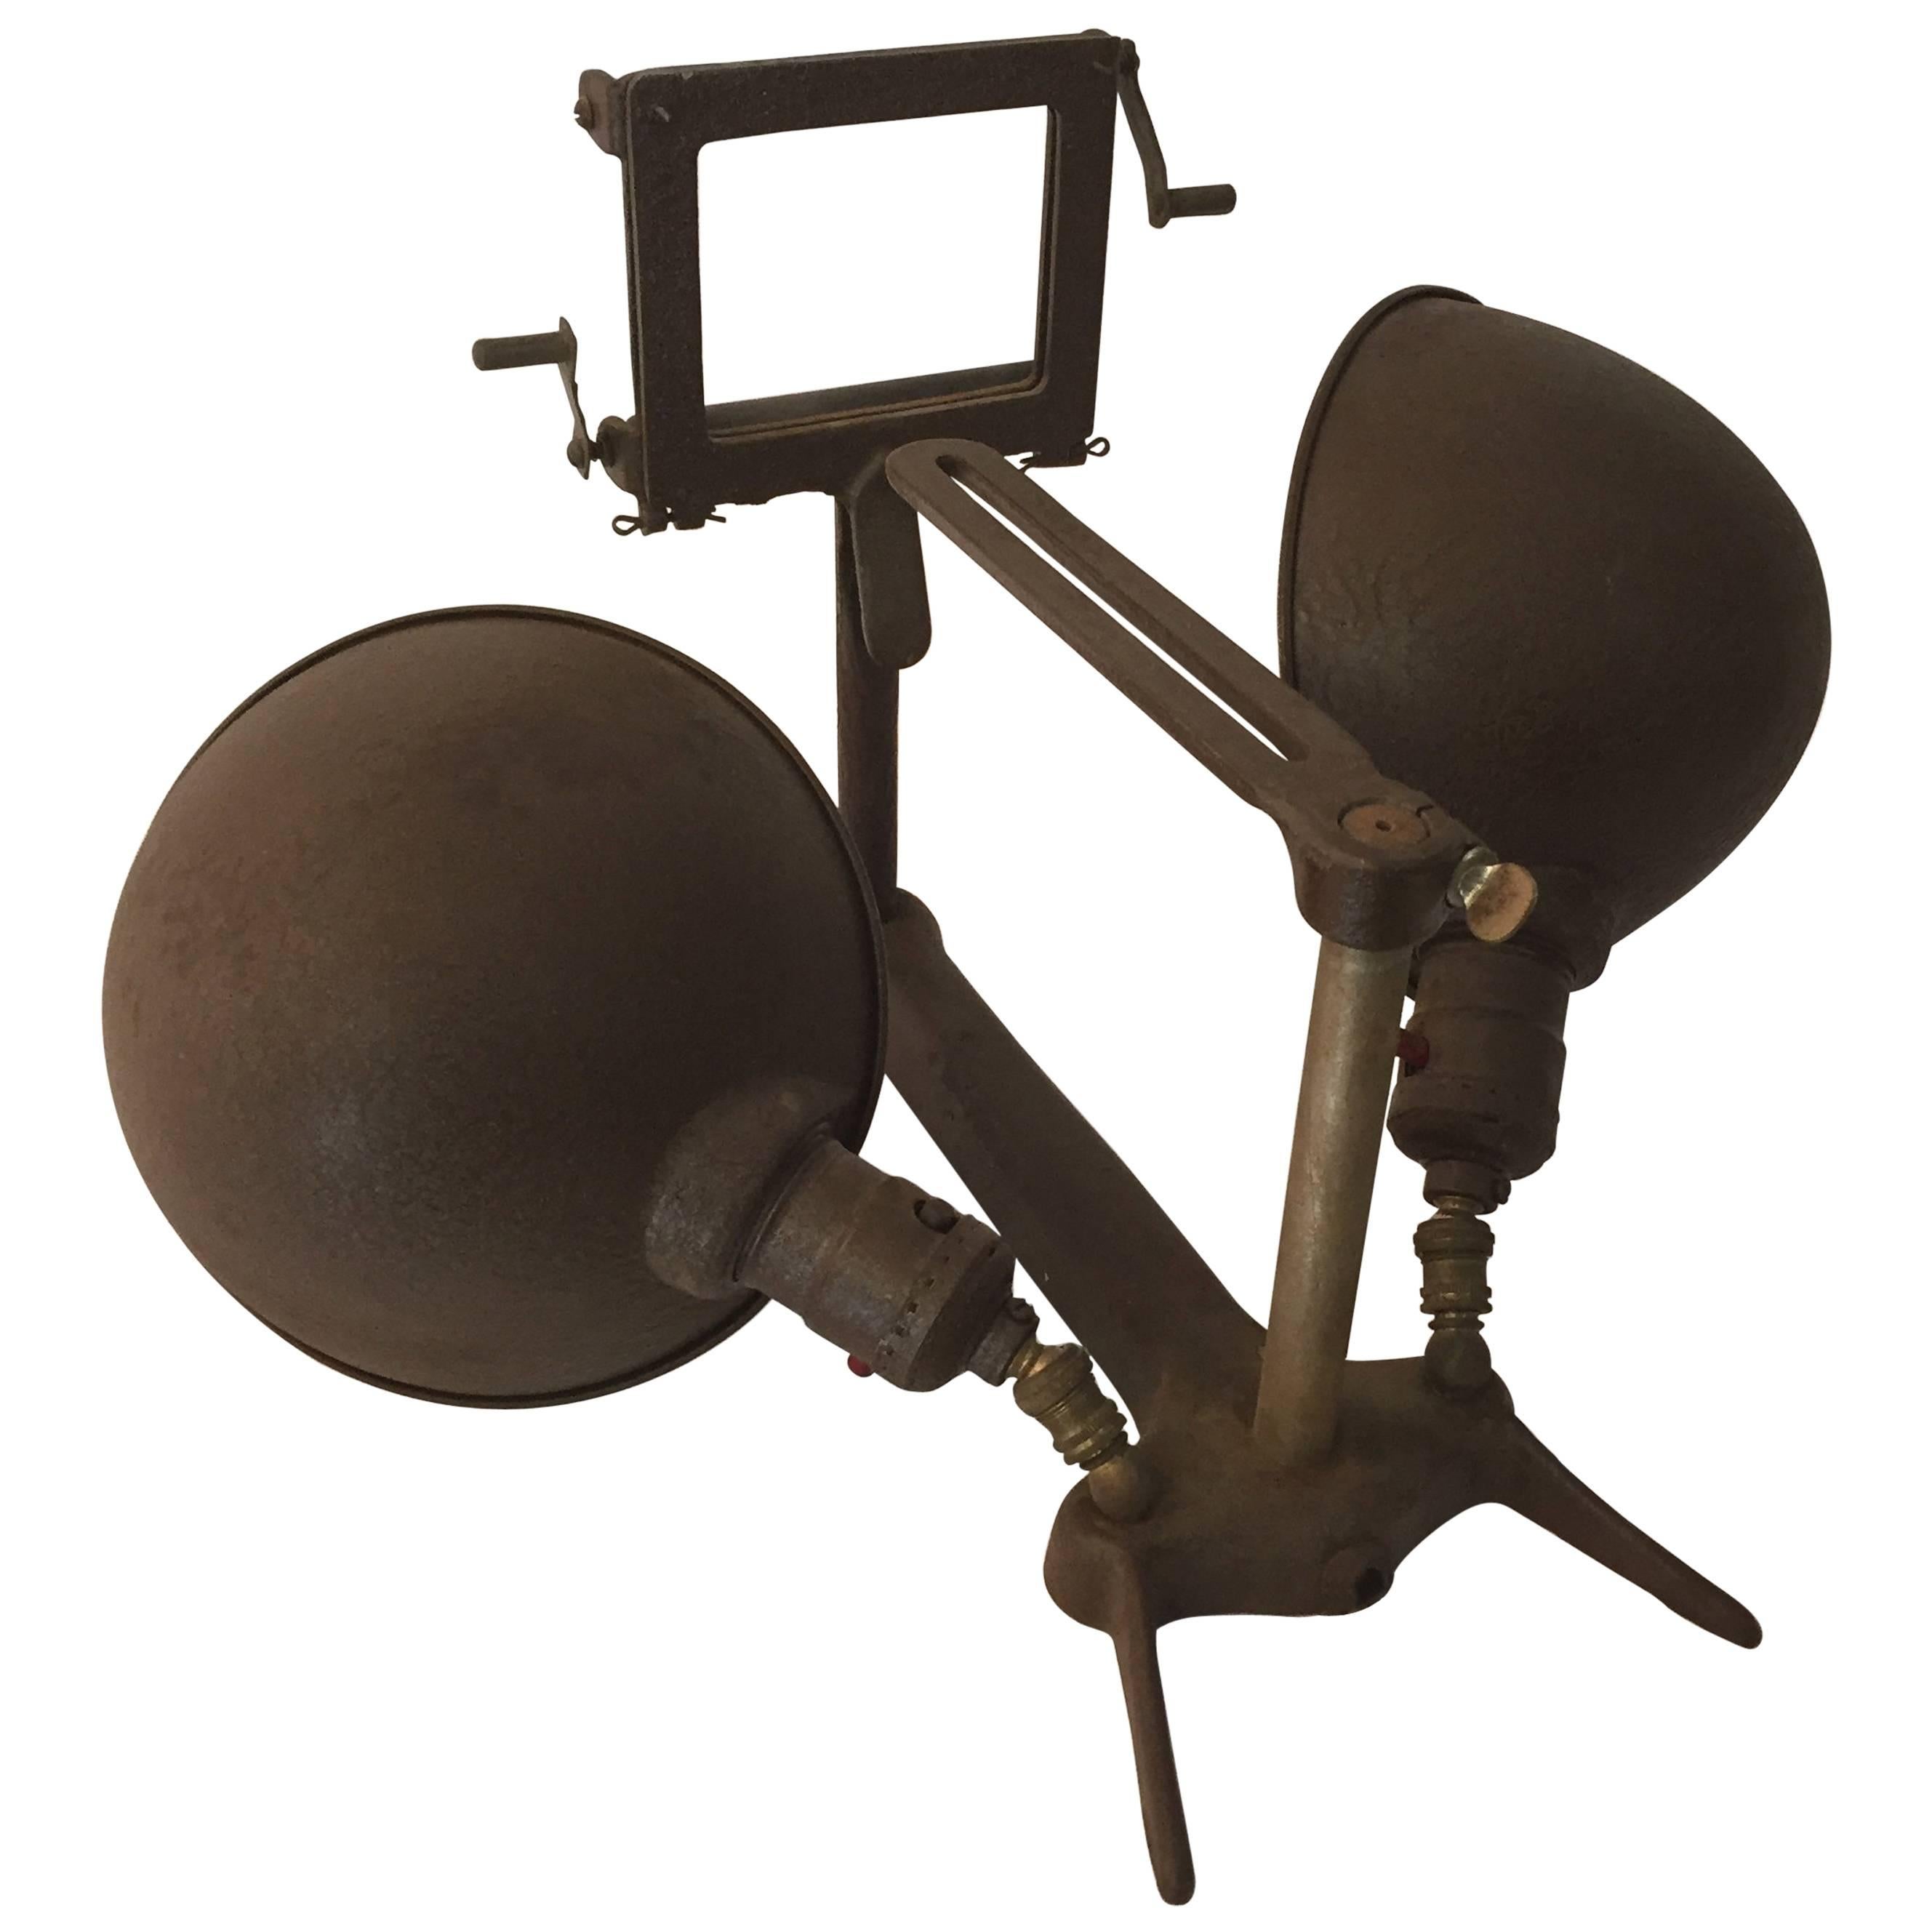 Industrial Double Light Projector Lamp